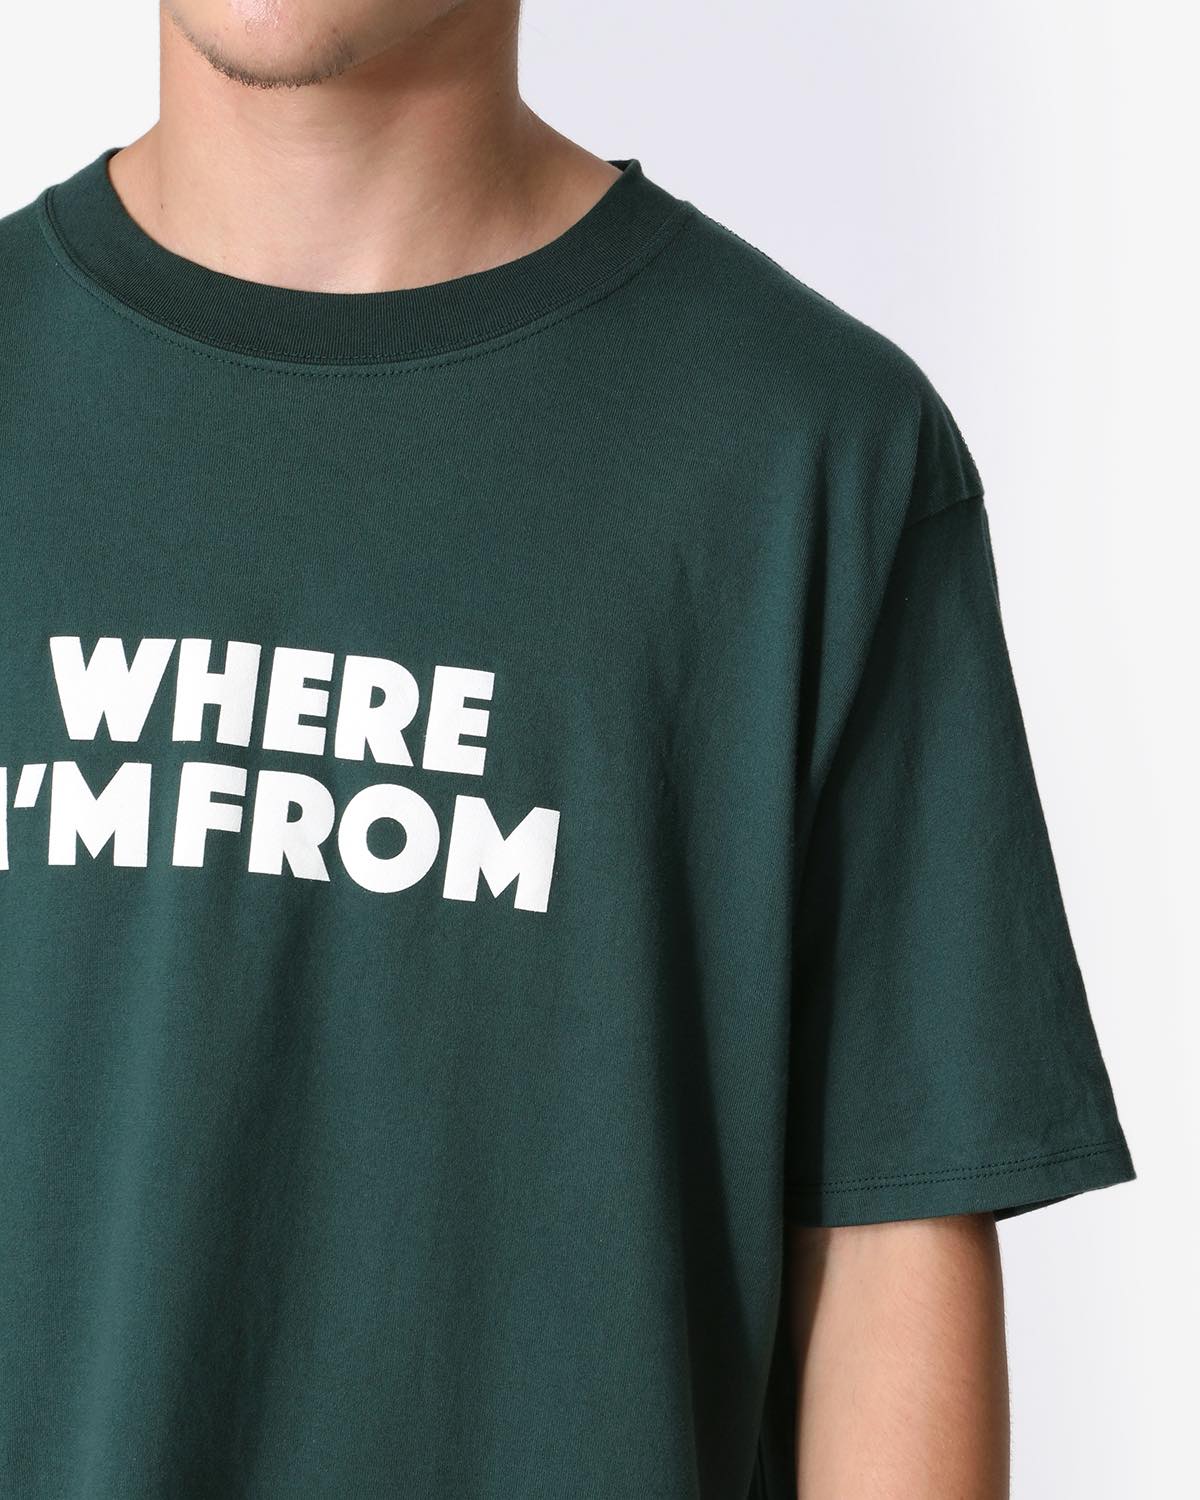 DWELLER S/S TEE "WHERE I'M FROM”